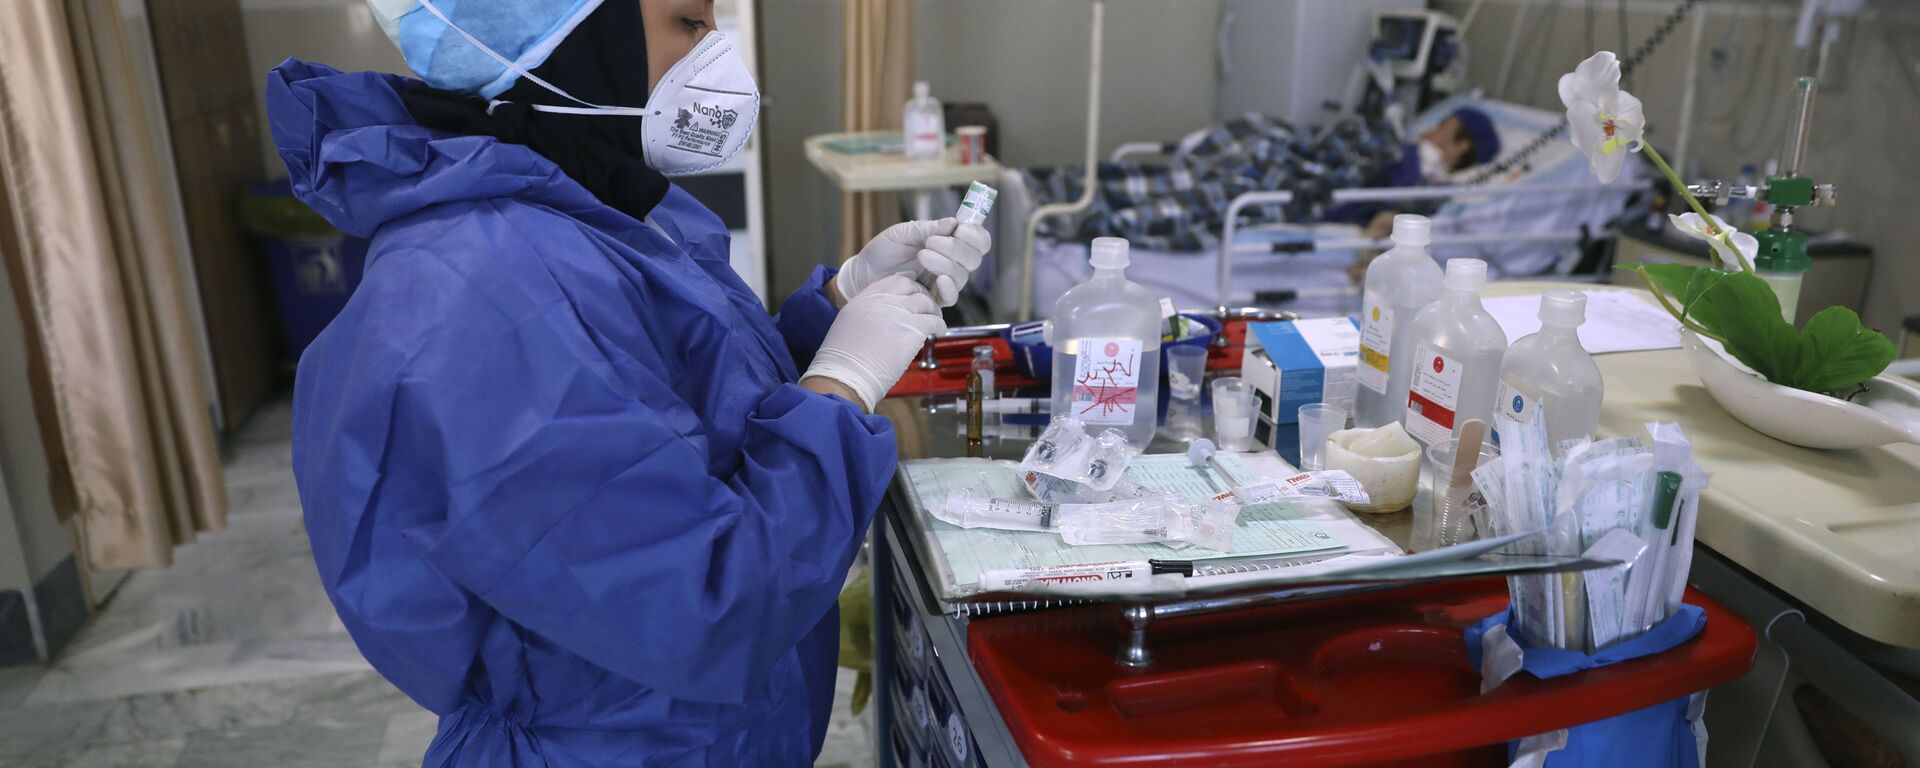 In this Tuesday, June 16, 2020, photo, a nurse prepares medicines for COVID-19 patients at the Shohadaye Tajrish Hospital in Tehran, Iran. After months of fighting the coronavirus, Iran only just saw its highest single-day spike in reported cases after Eid al-Fitr, the holiday that celebrates the end of Ramadan.  - Sputnik International, 1920